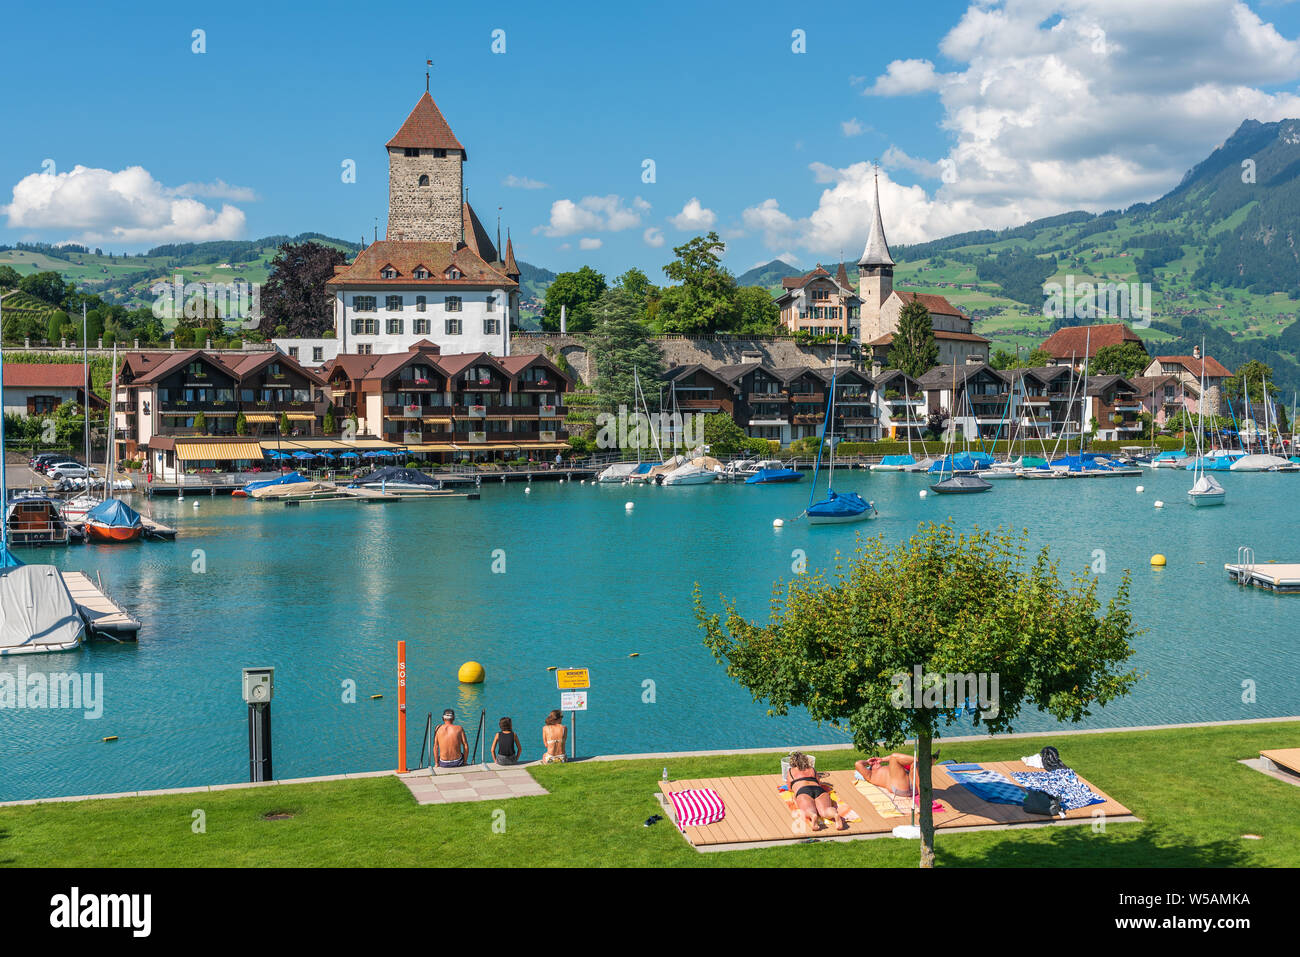 View over the open-air swimming pool to Spiez Castle, Spiez, Bernese Oberland, Switzerland, Europe Stock Photo